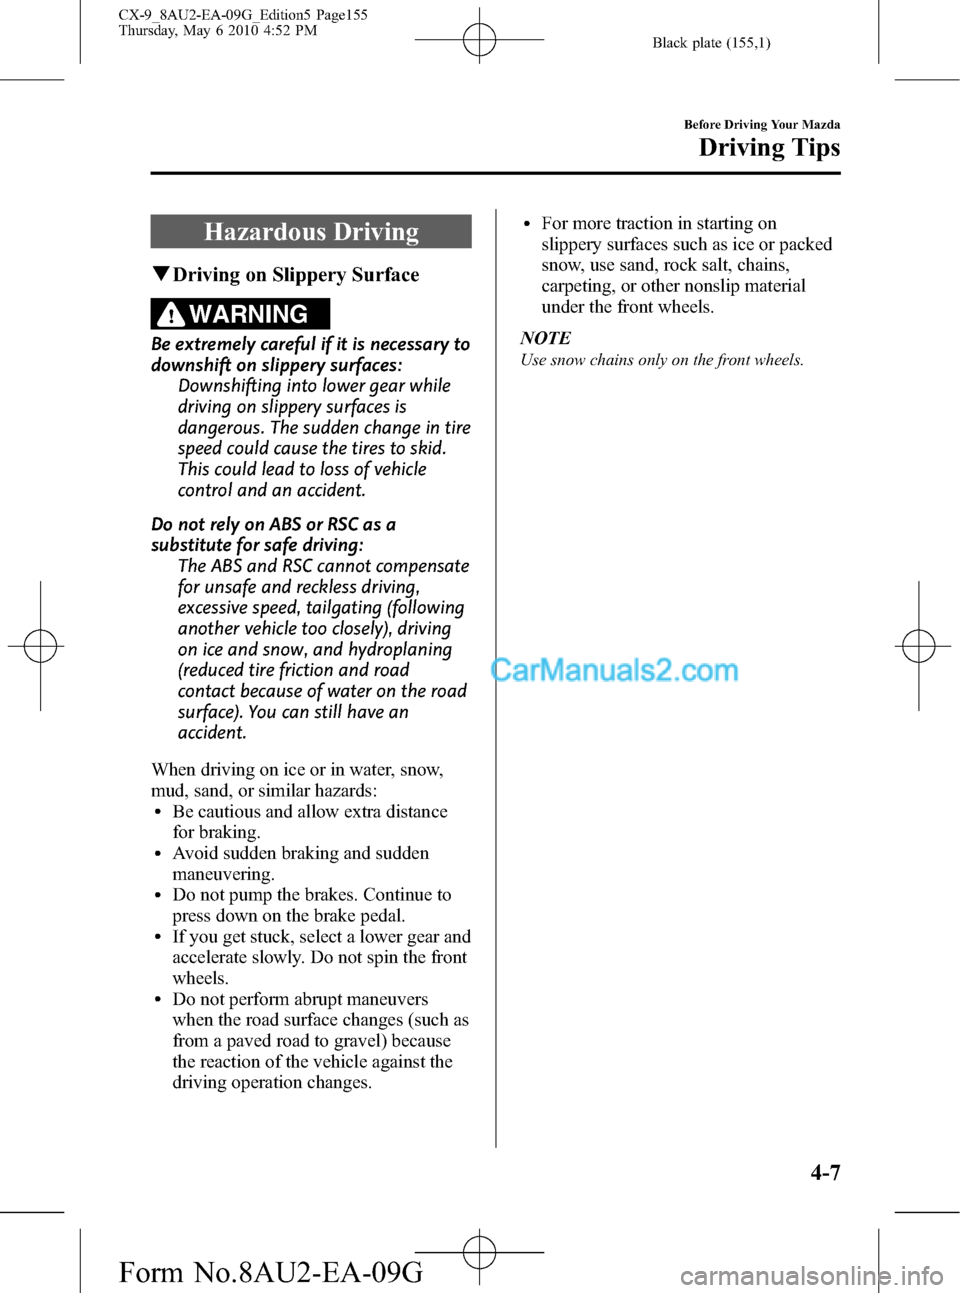 MAZDA MODEL CX-9 2010  Owners Manual (in English) Black plate (155,1)
Hazardous Driving
qDriving on Slippery Surface
WARNING
Be extremely careful if it is necessary to
downshift on slippery surfaces:
Downshifting into lower gear while
driving on slip